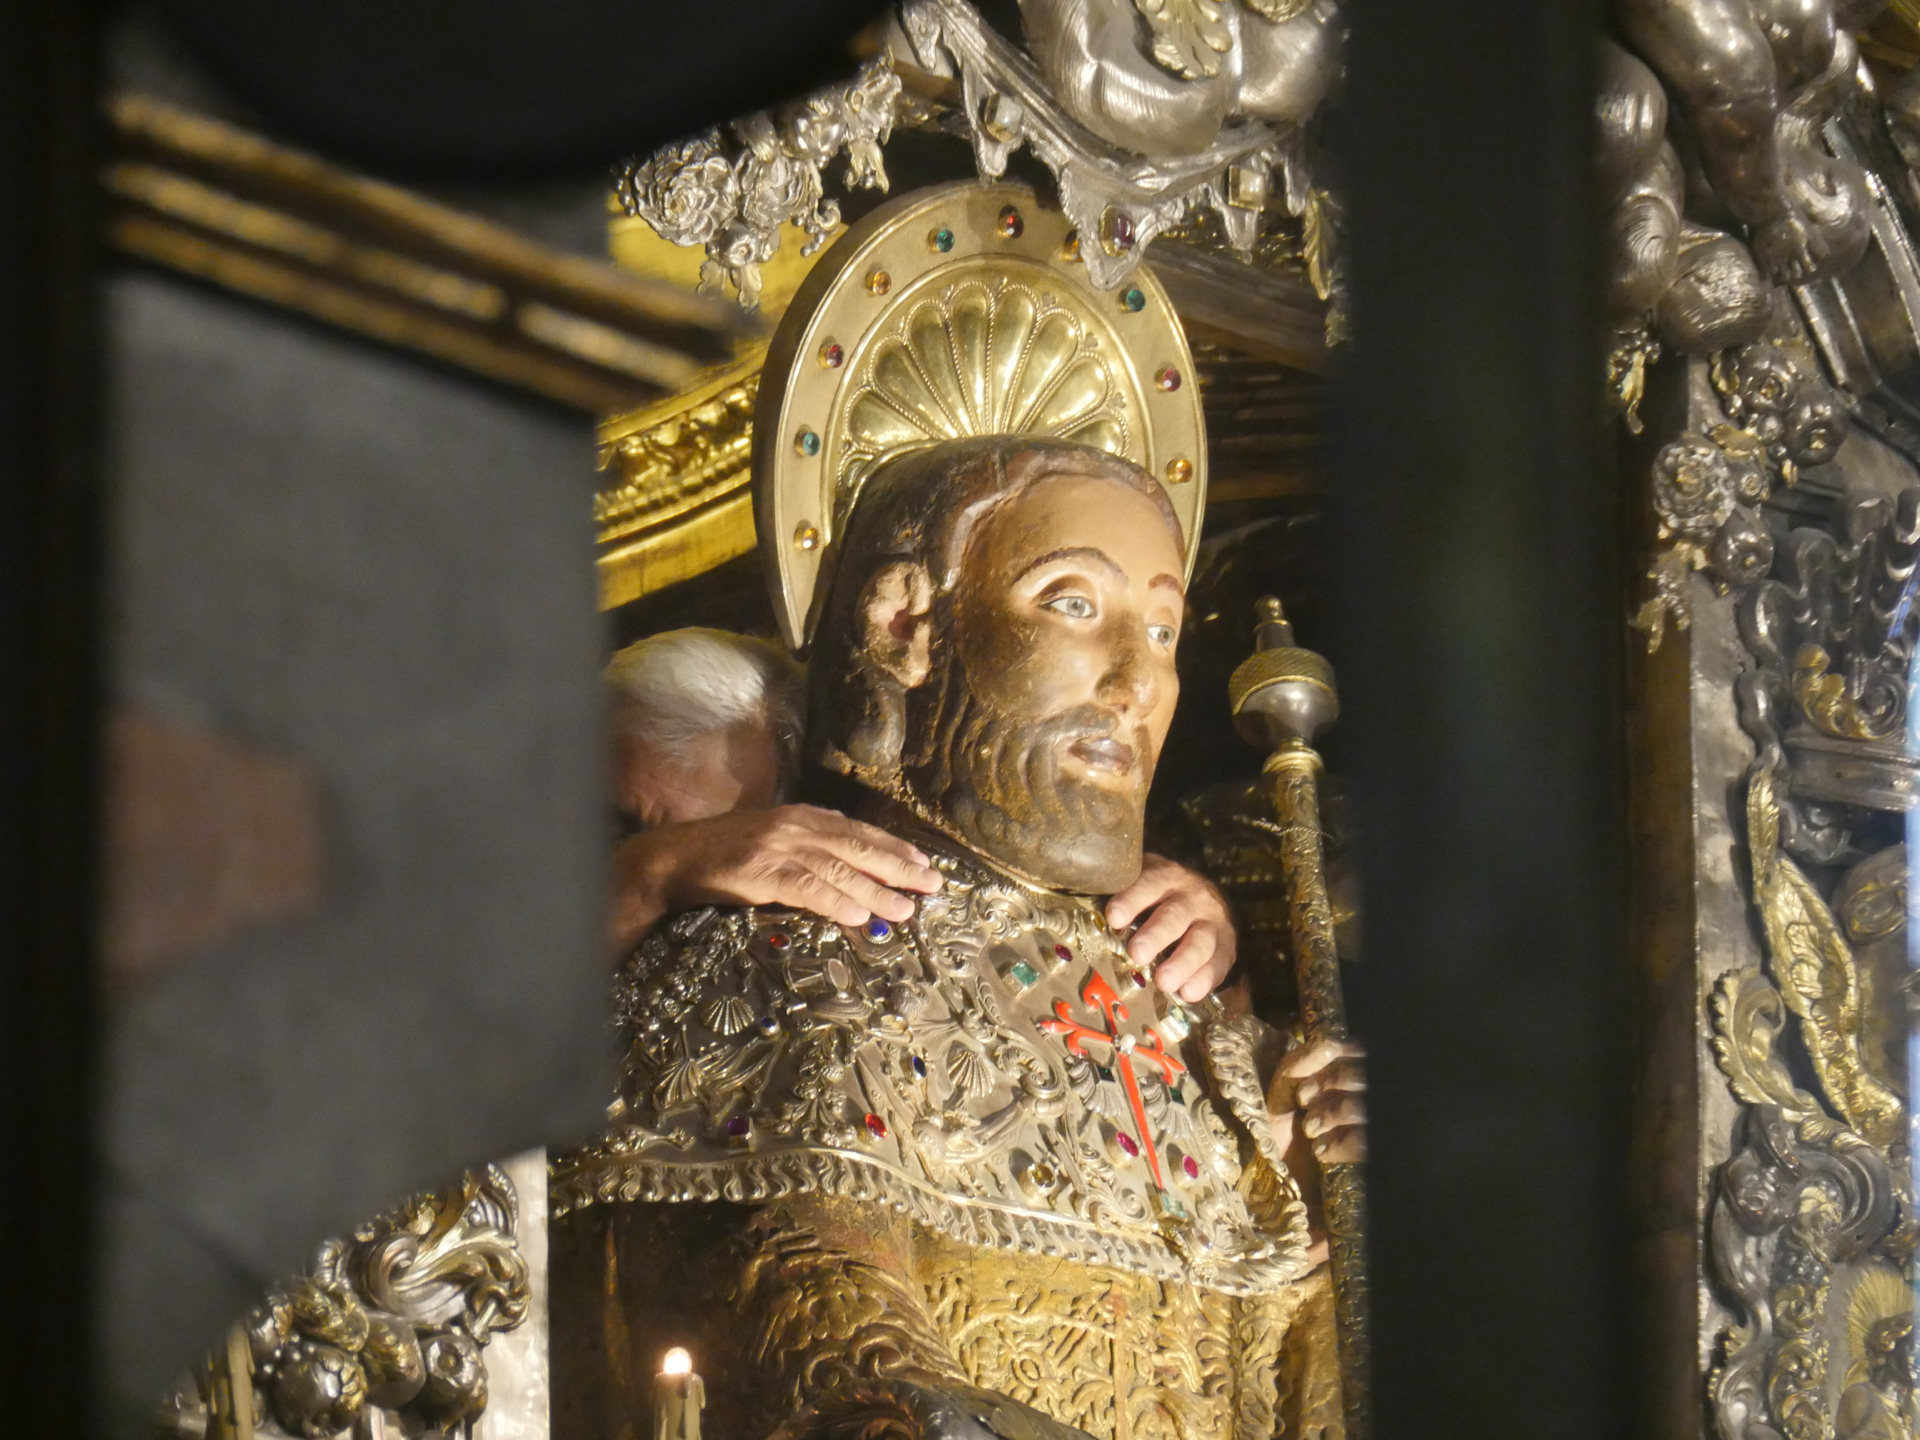 A man hugs the statue of St. James in the Santiago de Compostela Cathedral.